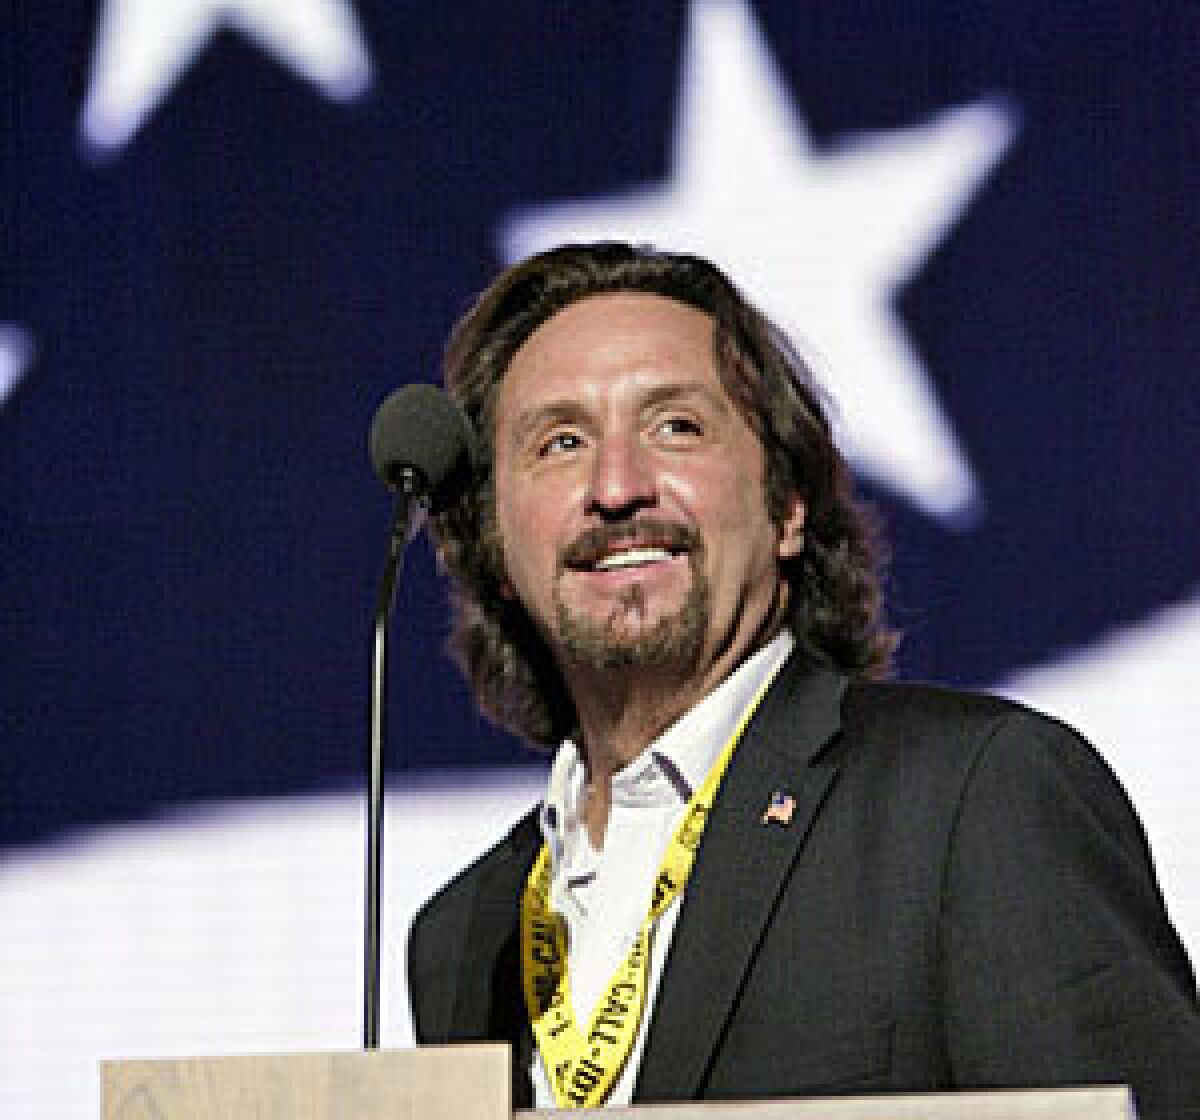 Ron Silver spoke at the 2004 Republican convention in New York.